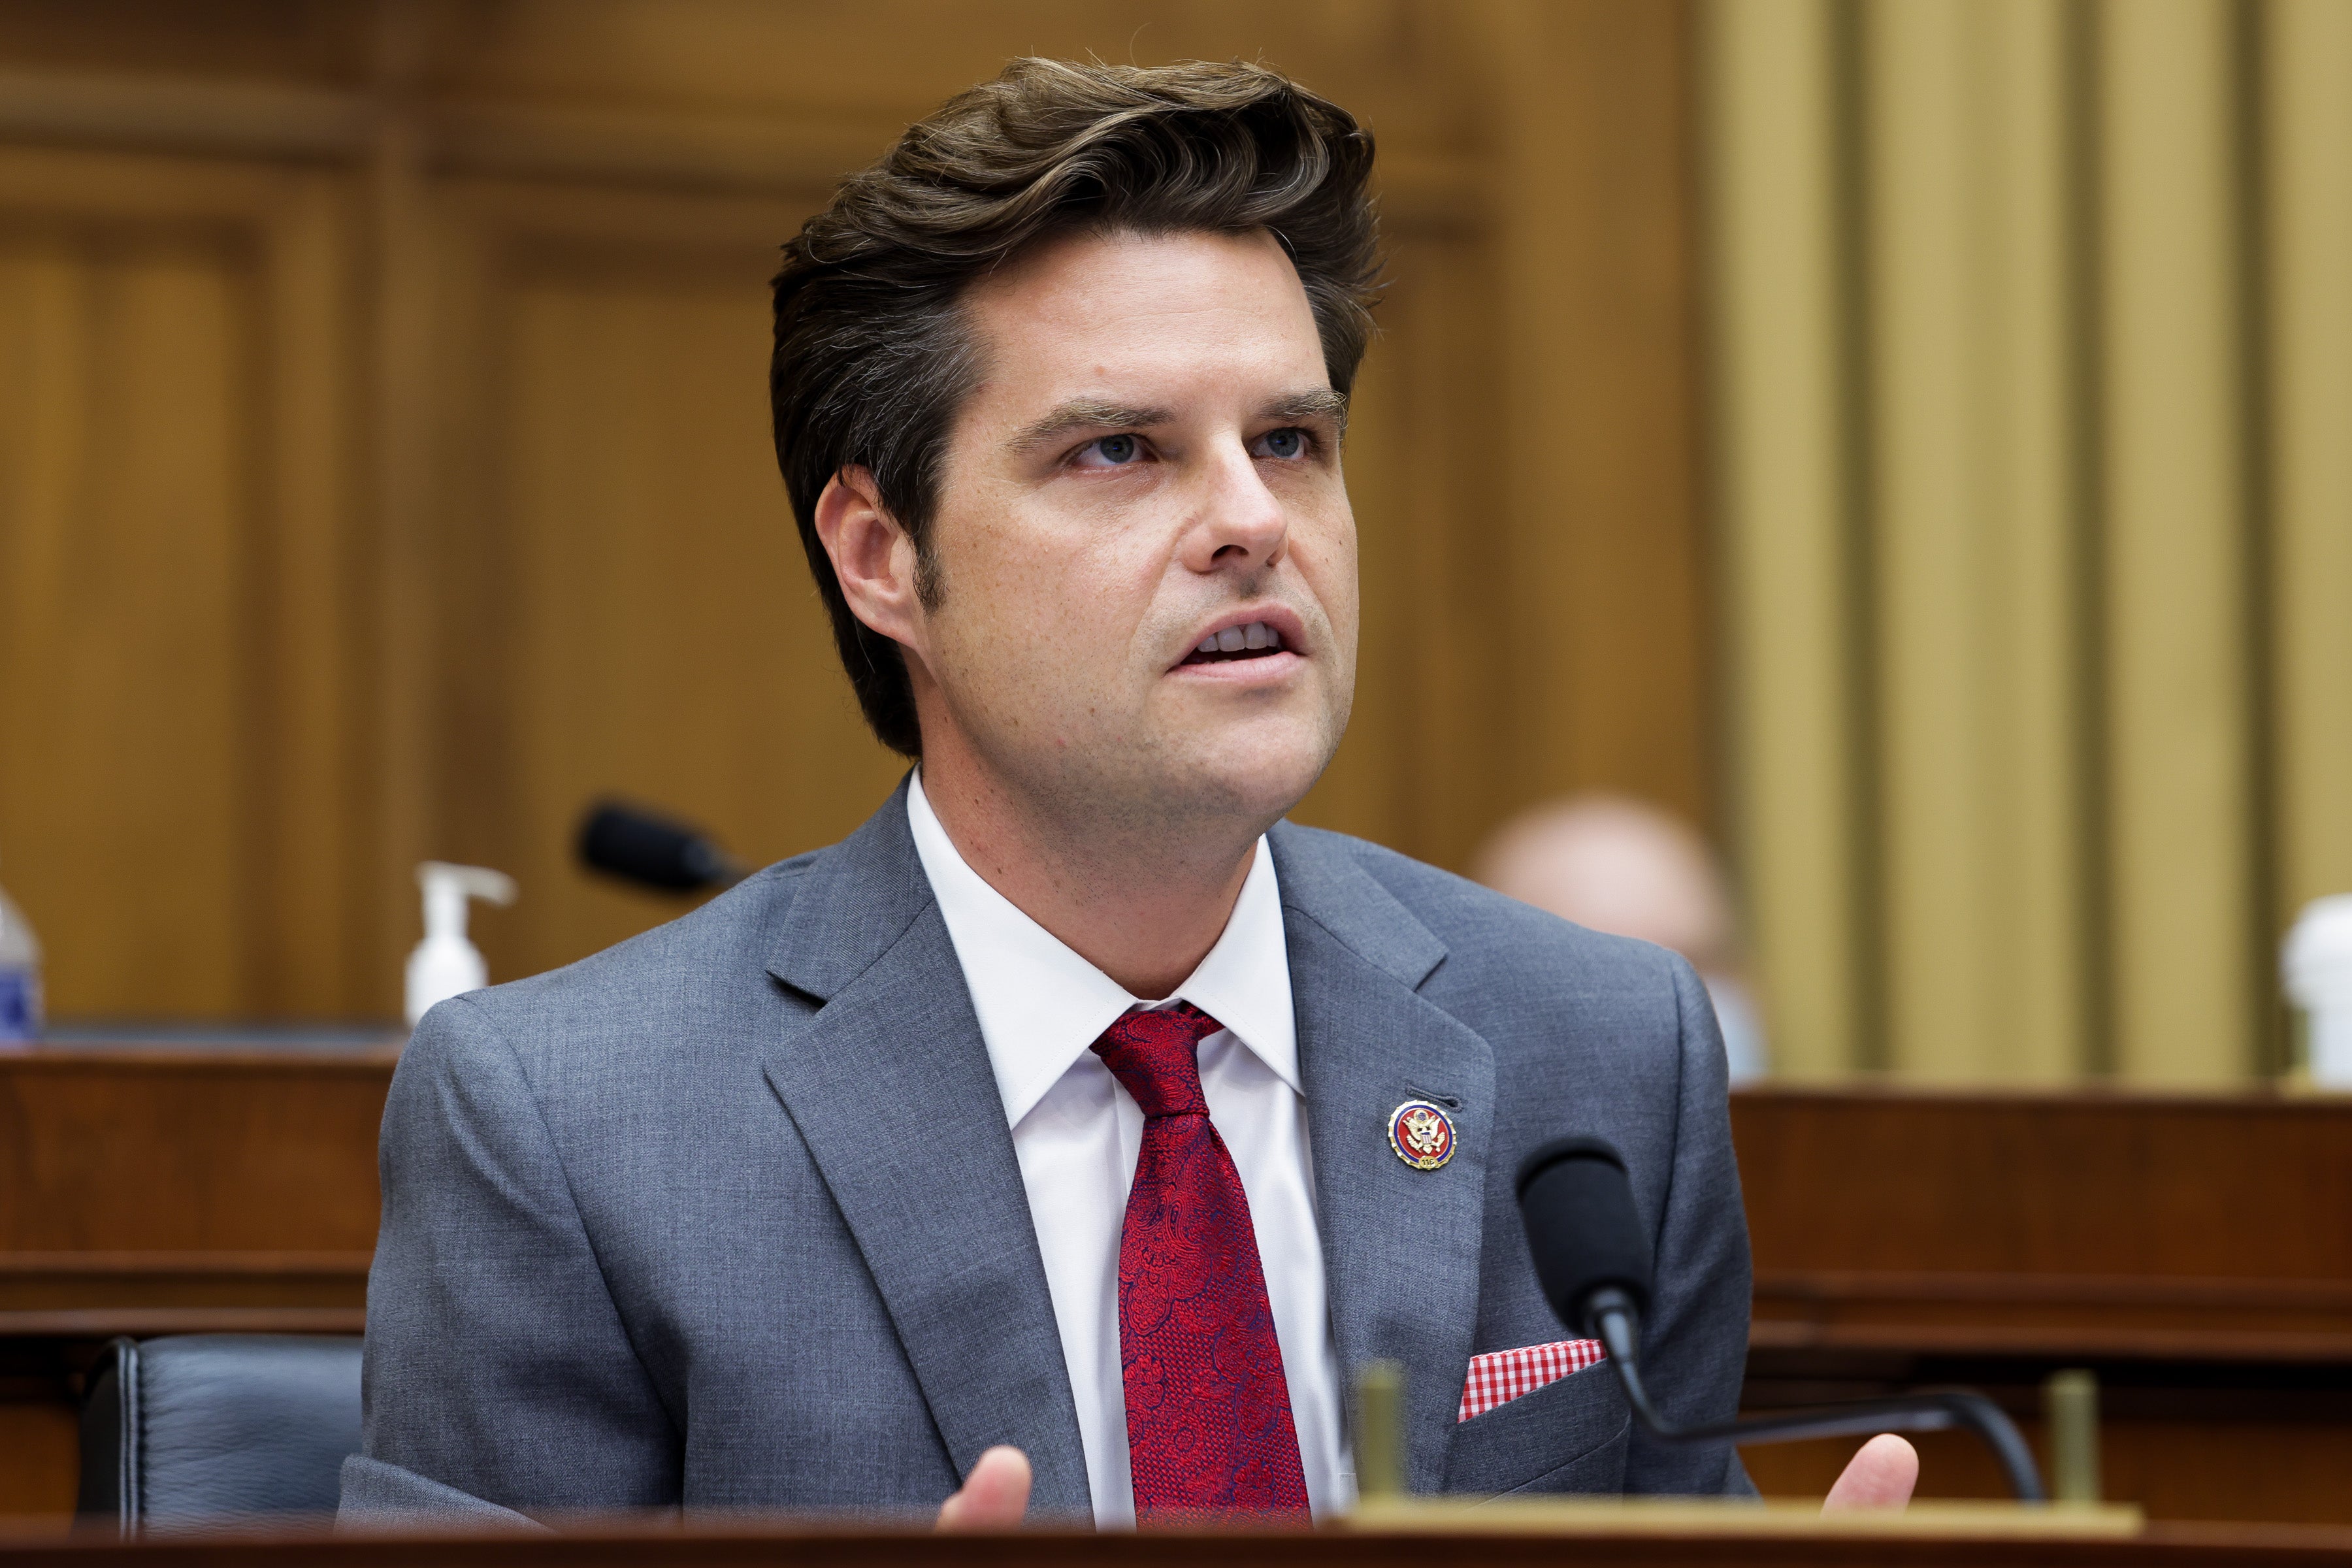 Matt Gaetz speaks during the House Judiciary Subcommittee on Antitrust, Commercial and Administrative Law hearing on 29 July, 2020